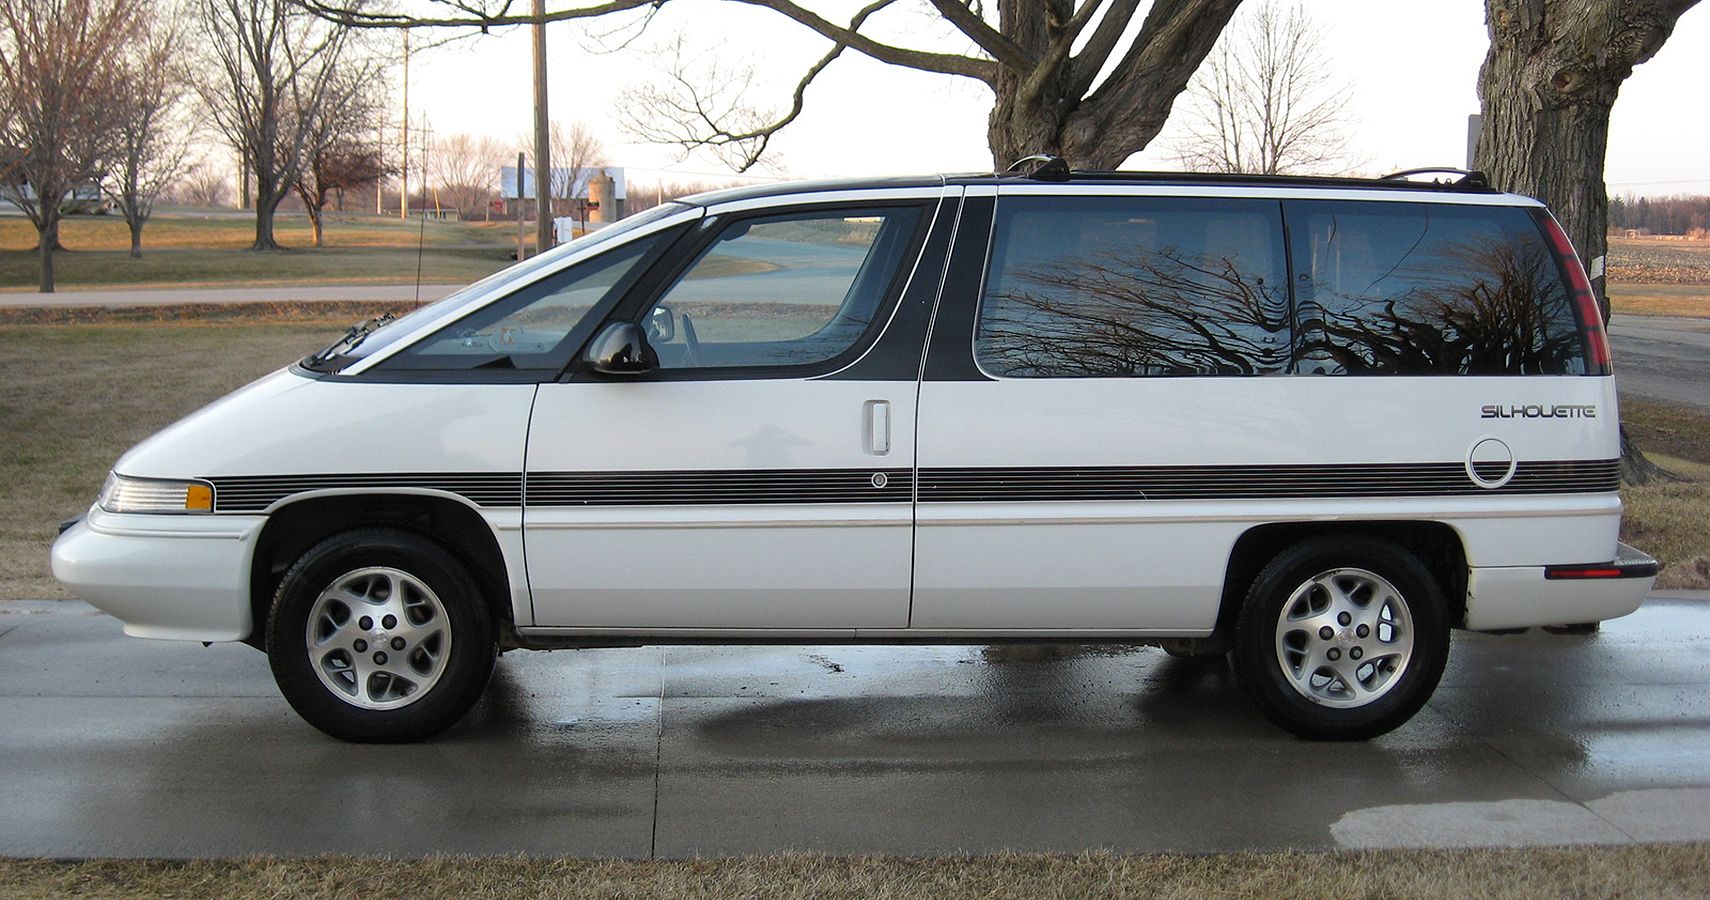 10 Cars That Made Oldsmobile (And 5 That Broke It)